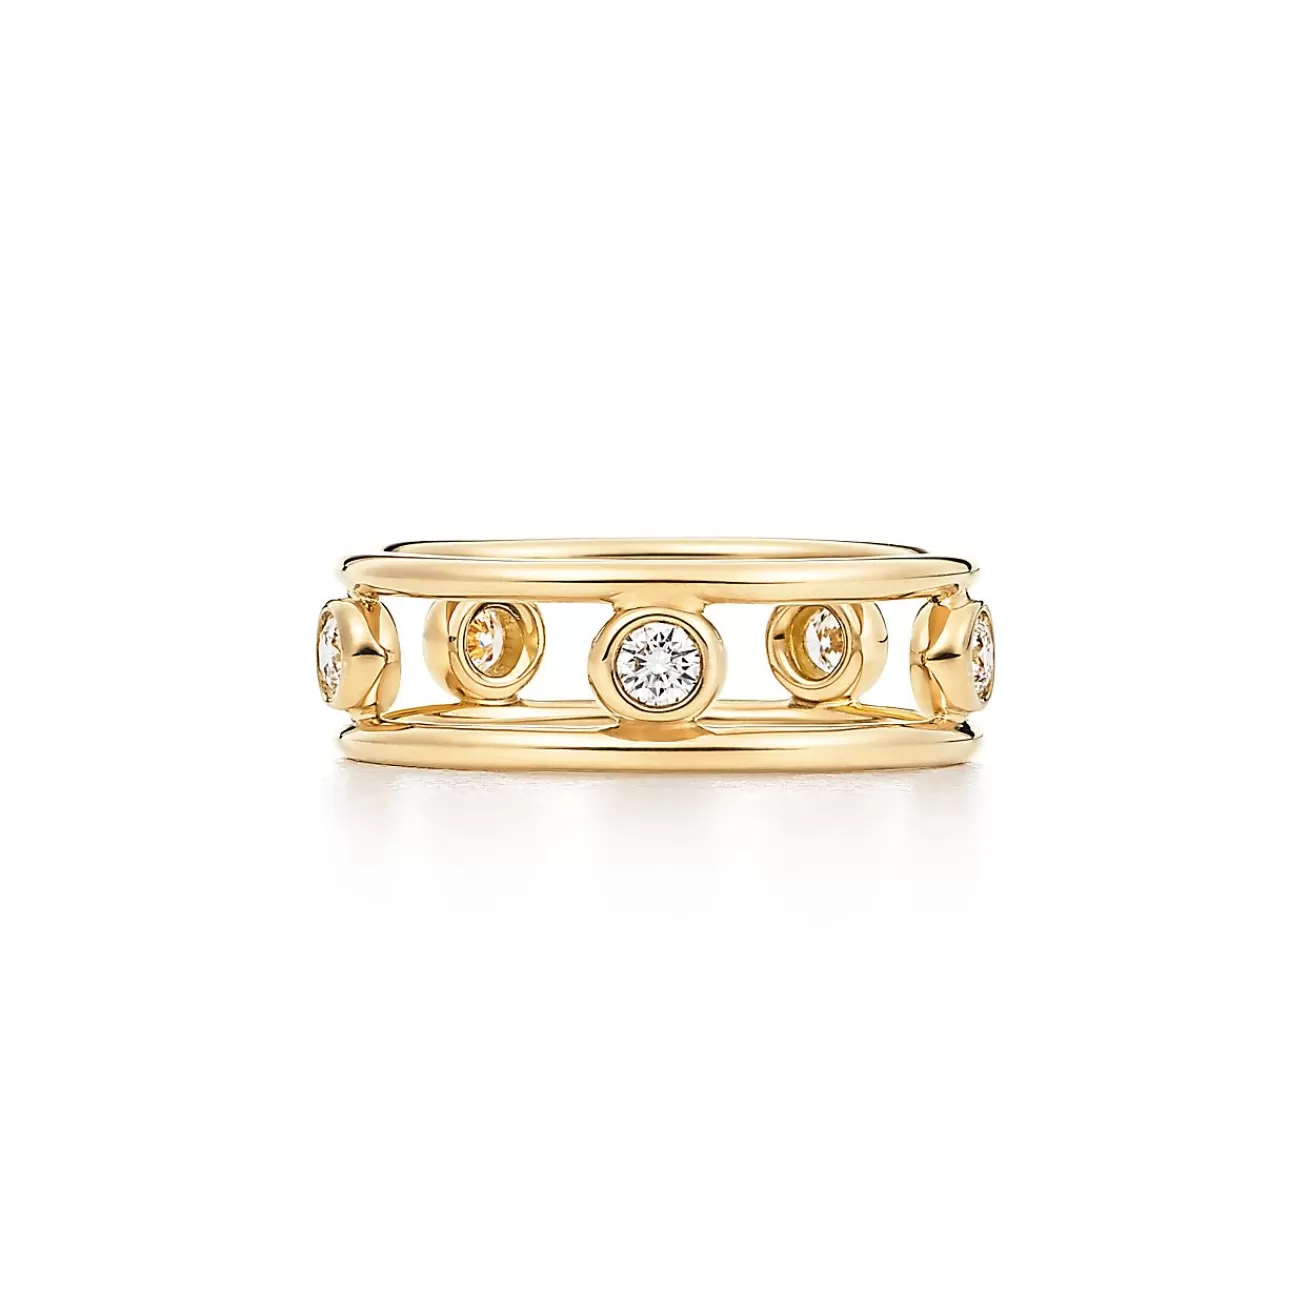 Tiffany & Co. Elsa Peretti® Diamonds by the Yard® ring in 18k gold with diamonds. | ^ Rings | Gold Jewelry